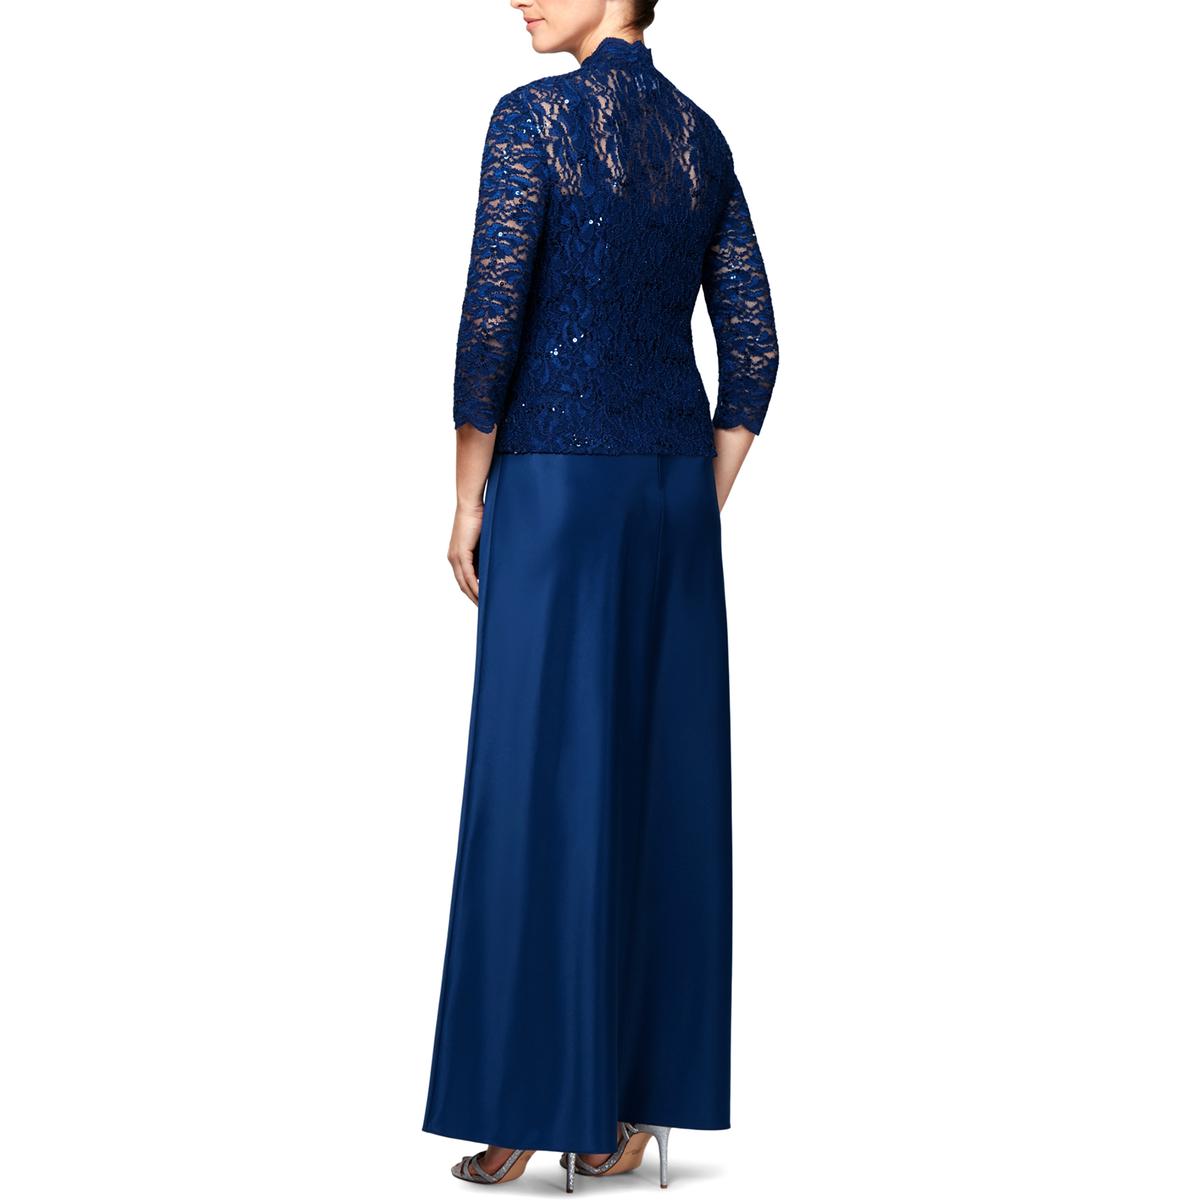 Alex Evenings Womens Navy Lace Overlay Sequined Evening Dress Gown 8 ...